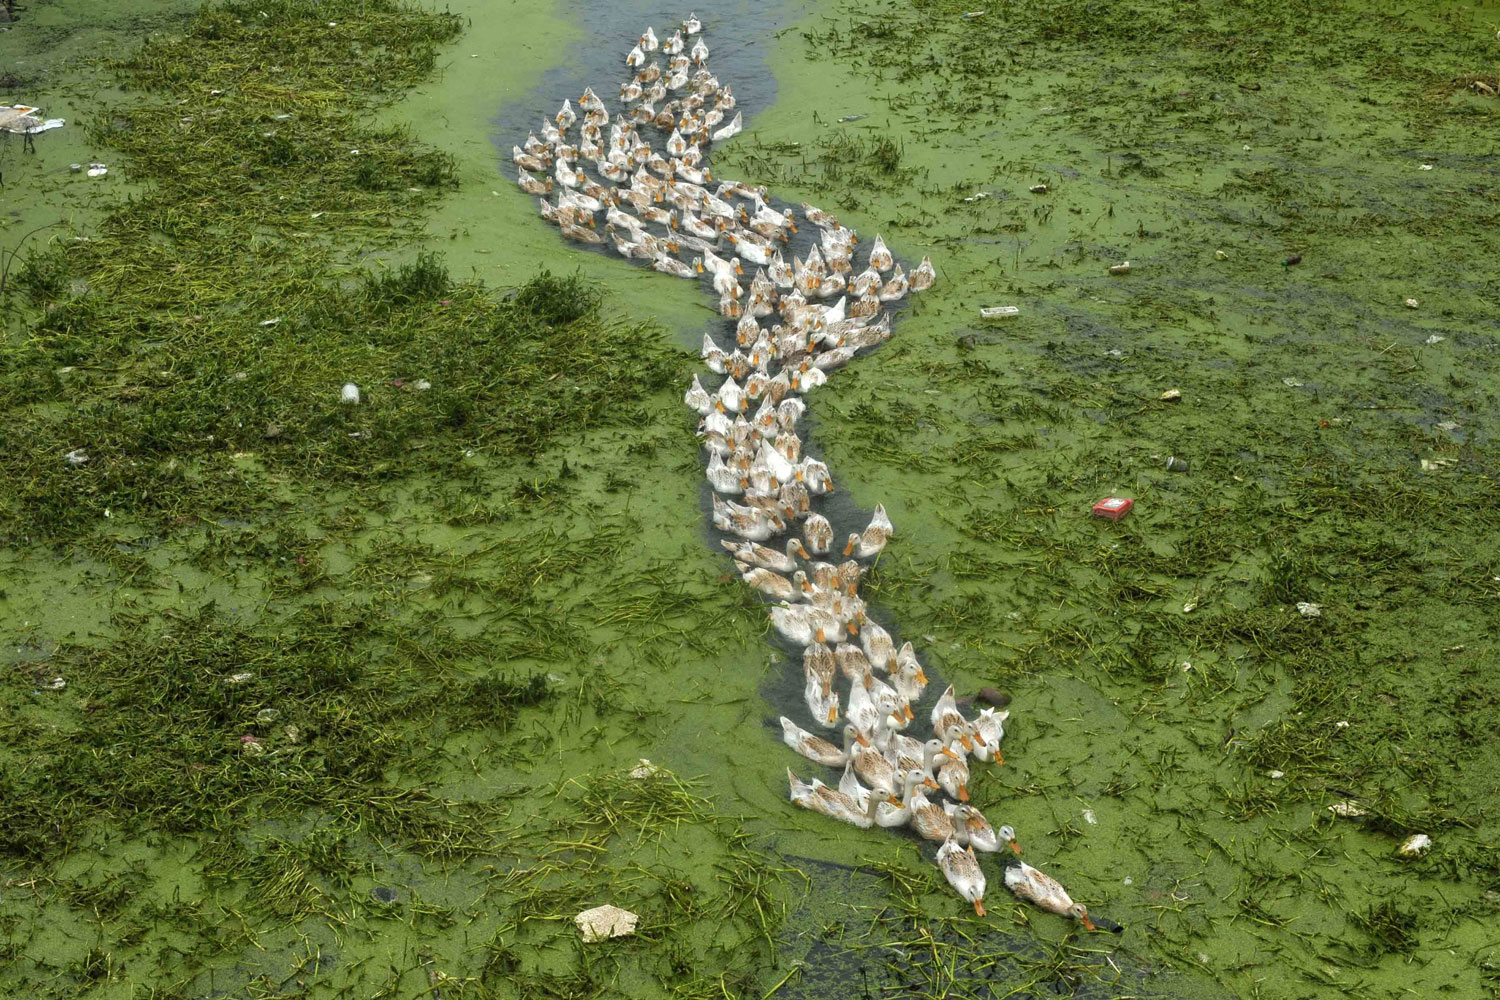 Ducks swim in a polluted river, covered by green algae in Jiaxing, Zhejiang Province of China, July 11, 2011.